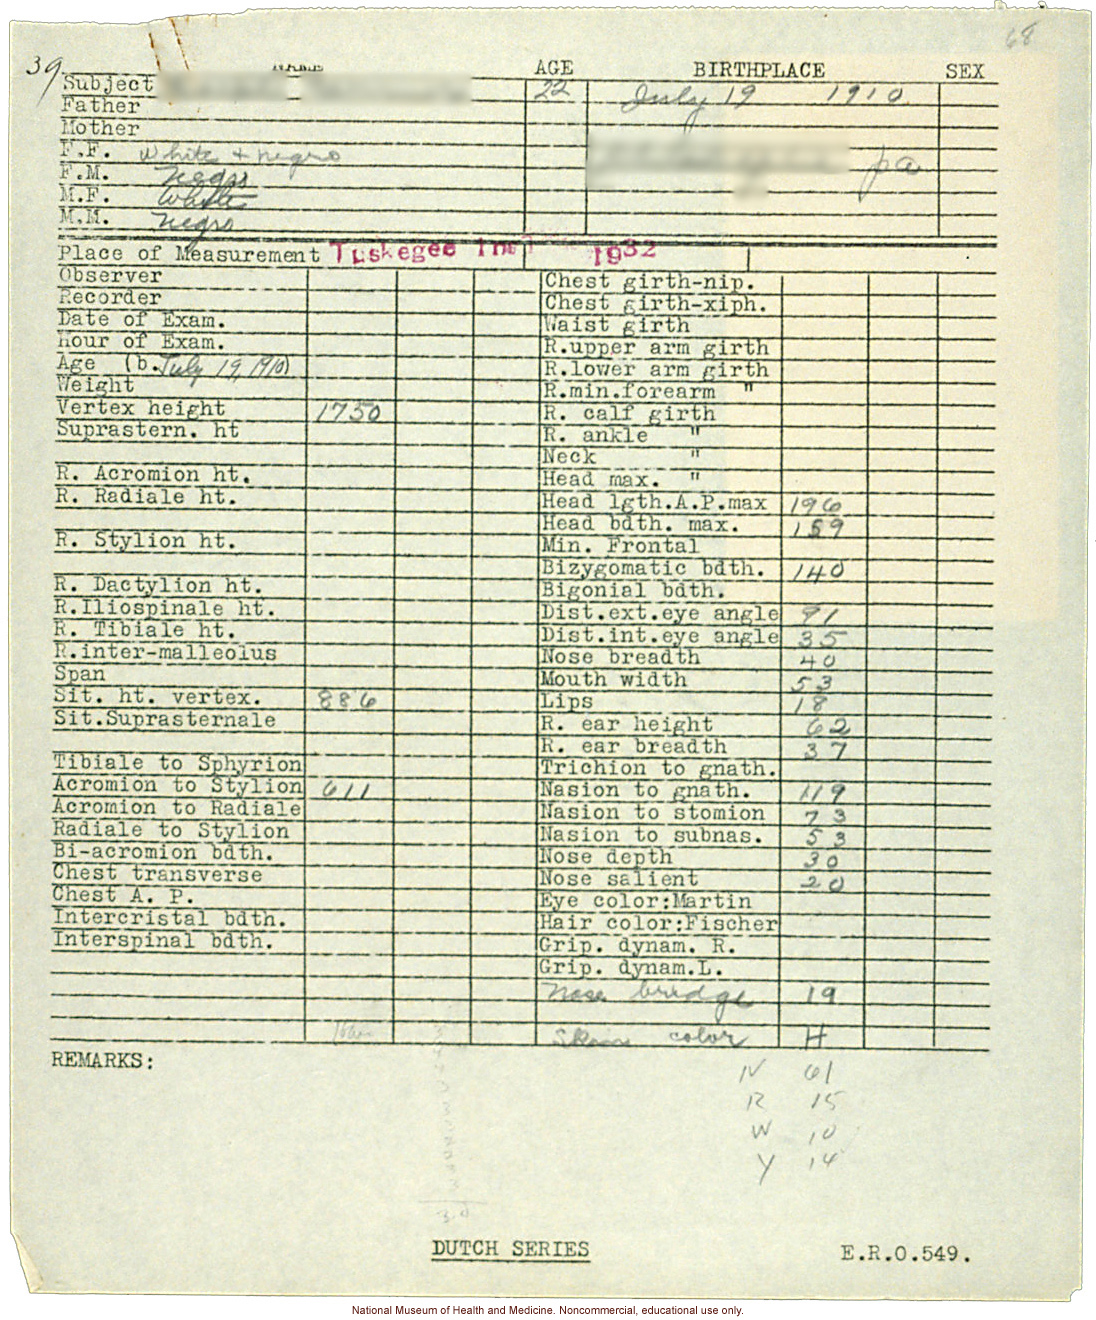 Adult male anthropometric cases, collected by Charles Davenport at Tuskegee Institute, Alabama (measurements and lineage forms)